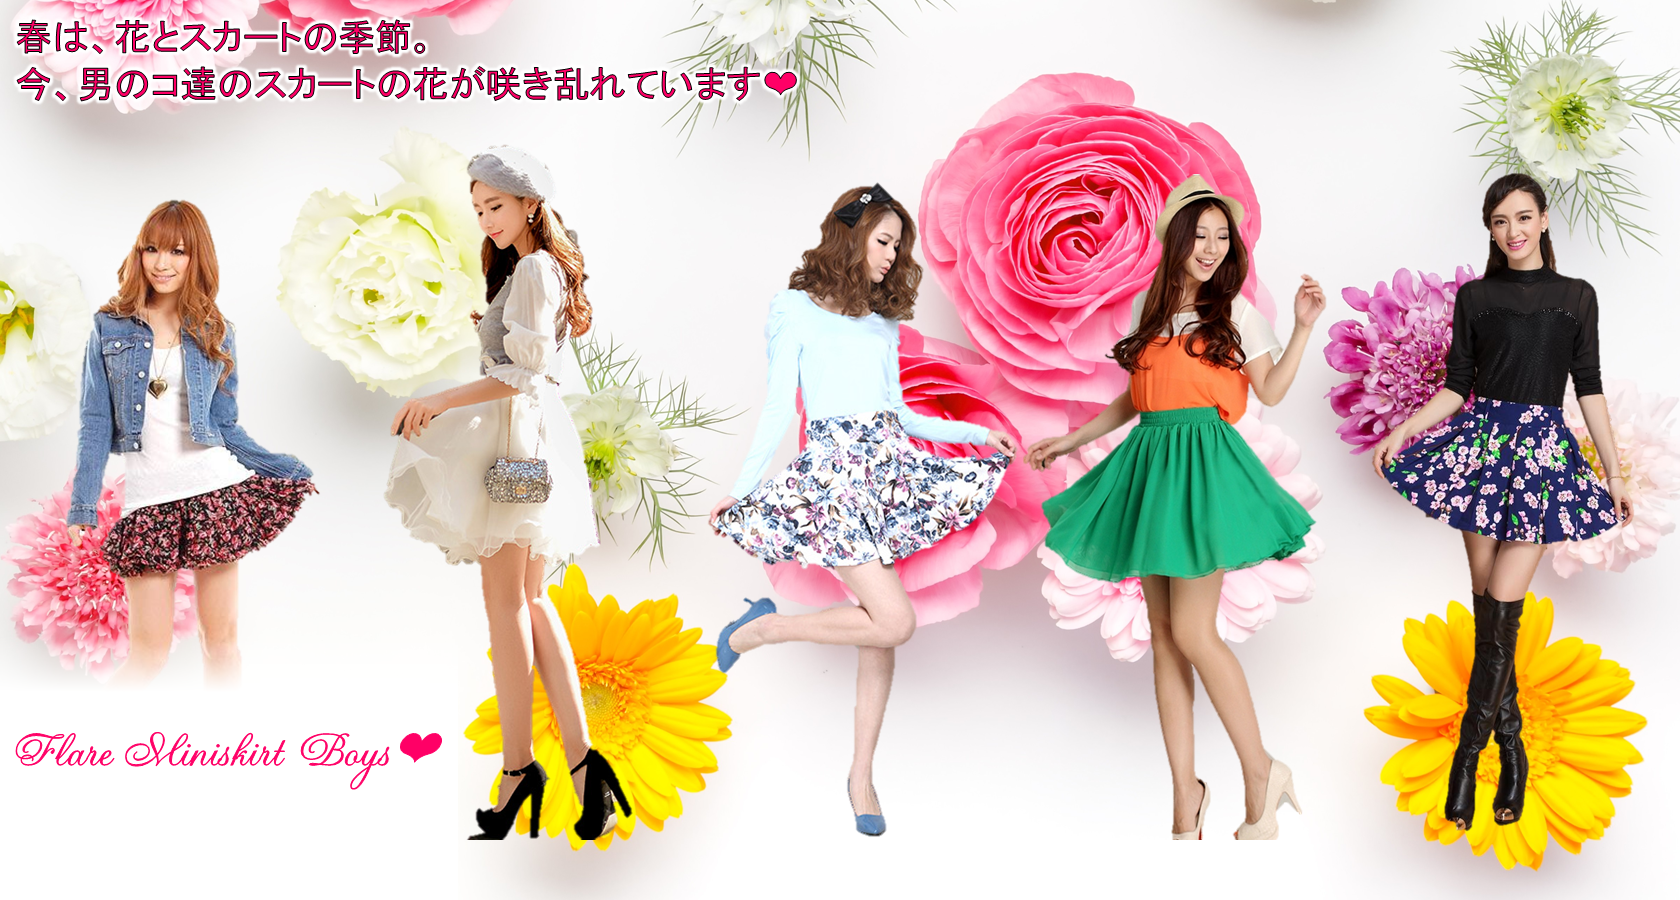 Spring is the season of flowers and skirts J